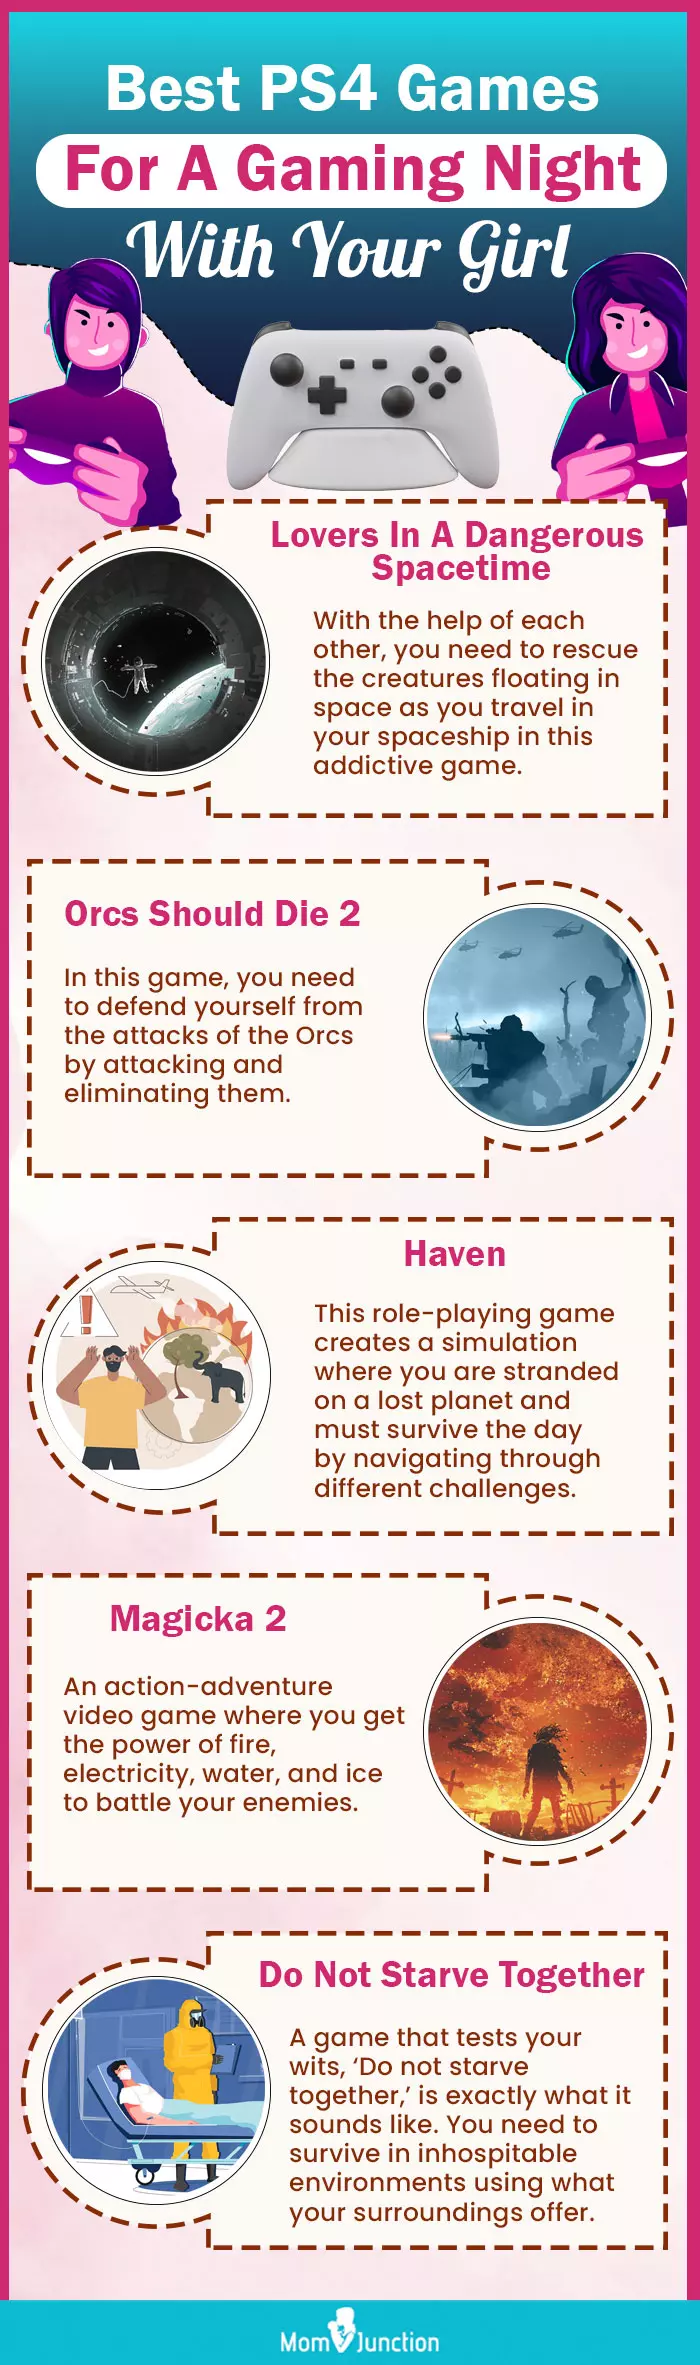 ps4 games with your girlfriend (infographic)